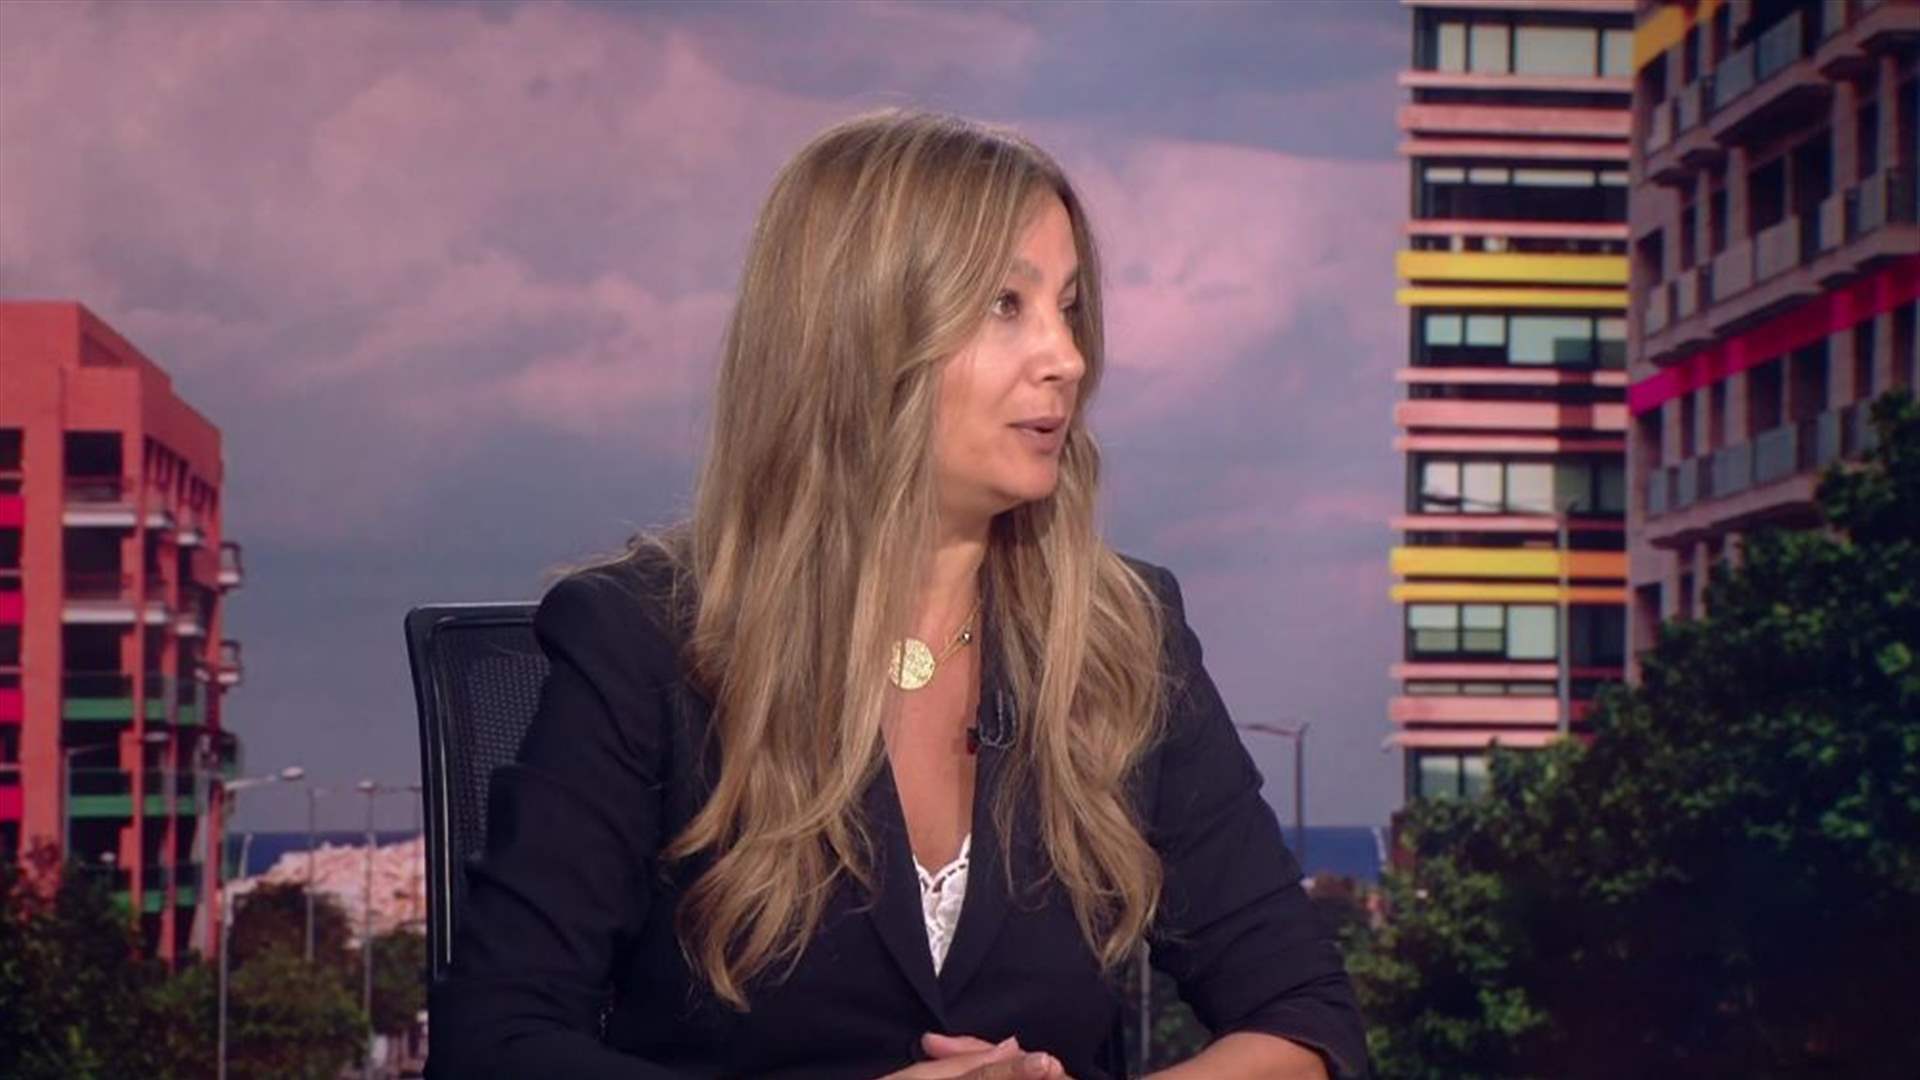 Lawyer Cecile Roukoz to LBCI: Lebanese citizens must demand justice for Beirut blast victims